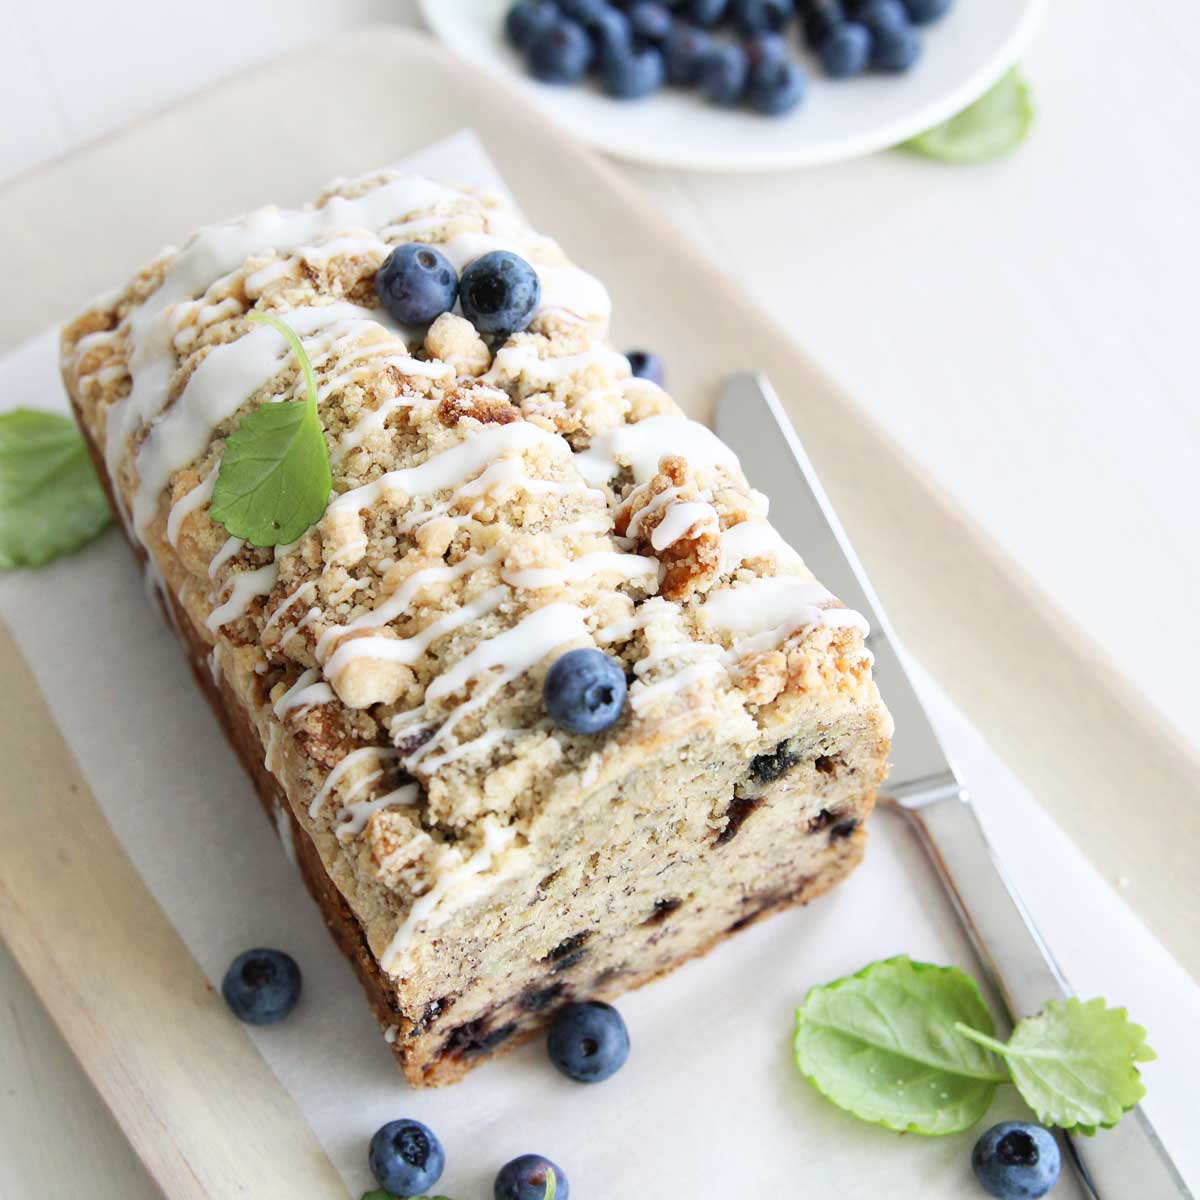 Blueberry Banana Bread with Oats & Streusel (Eggless, Dairy Free) - Peanut Butter Banana Bread